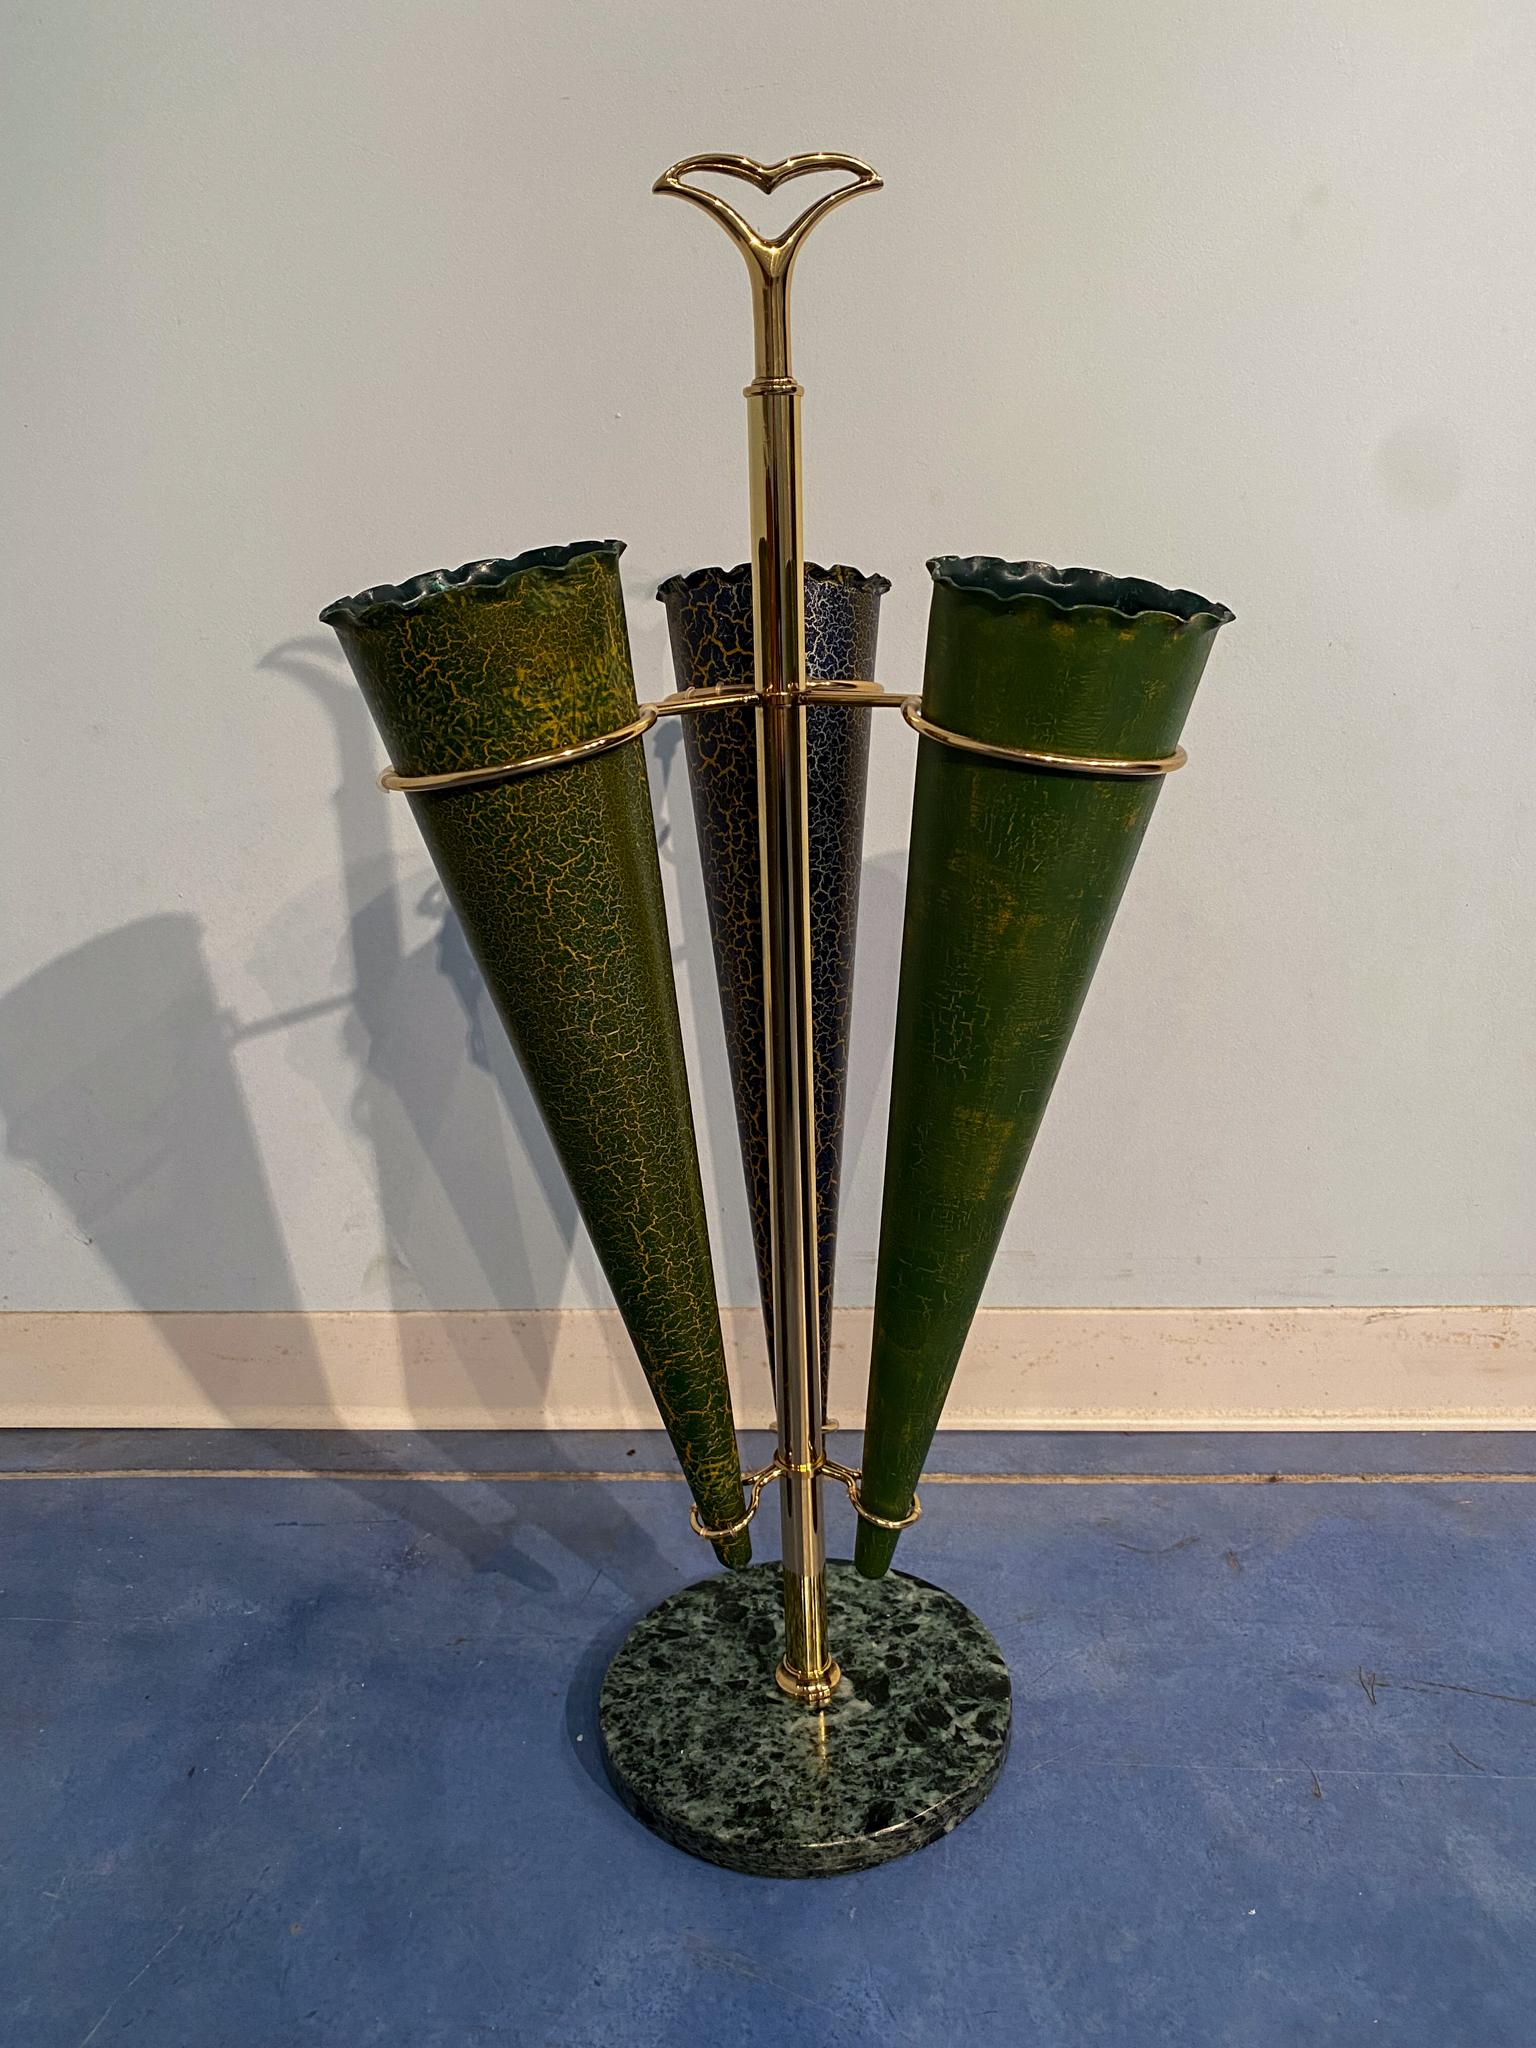 This Italian mid-century umbrella stand has a great executive quality that is denoted by various details, such as the round base in precious green marble from the Alps or the stylish brass frame design. The hand-painting gives a cracked effect on